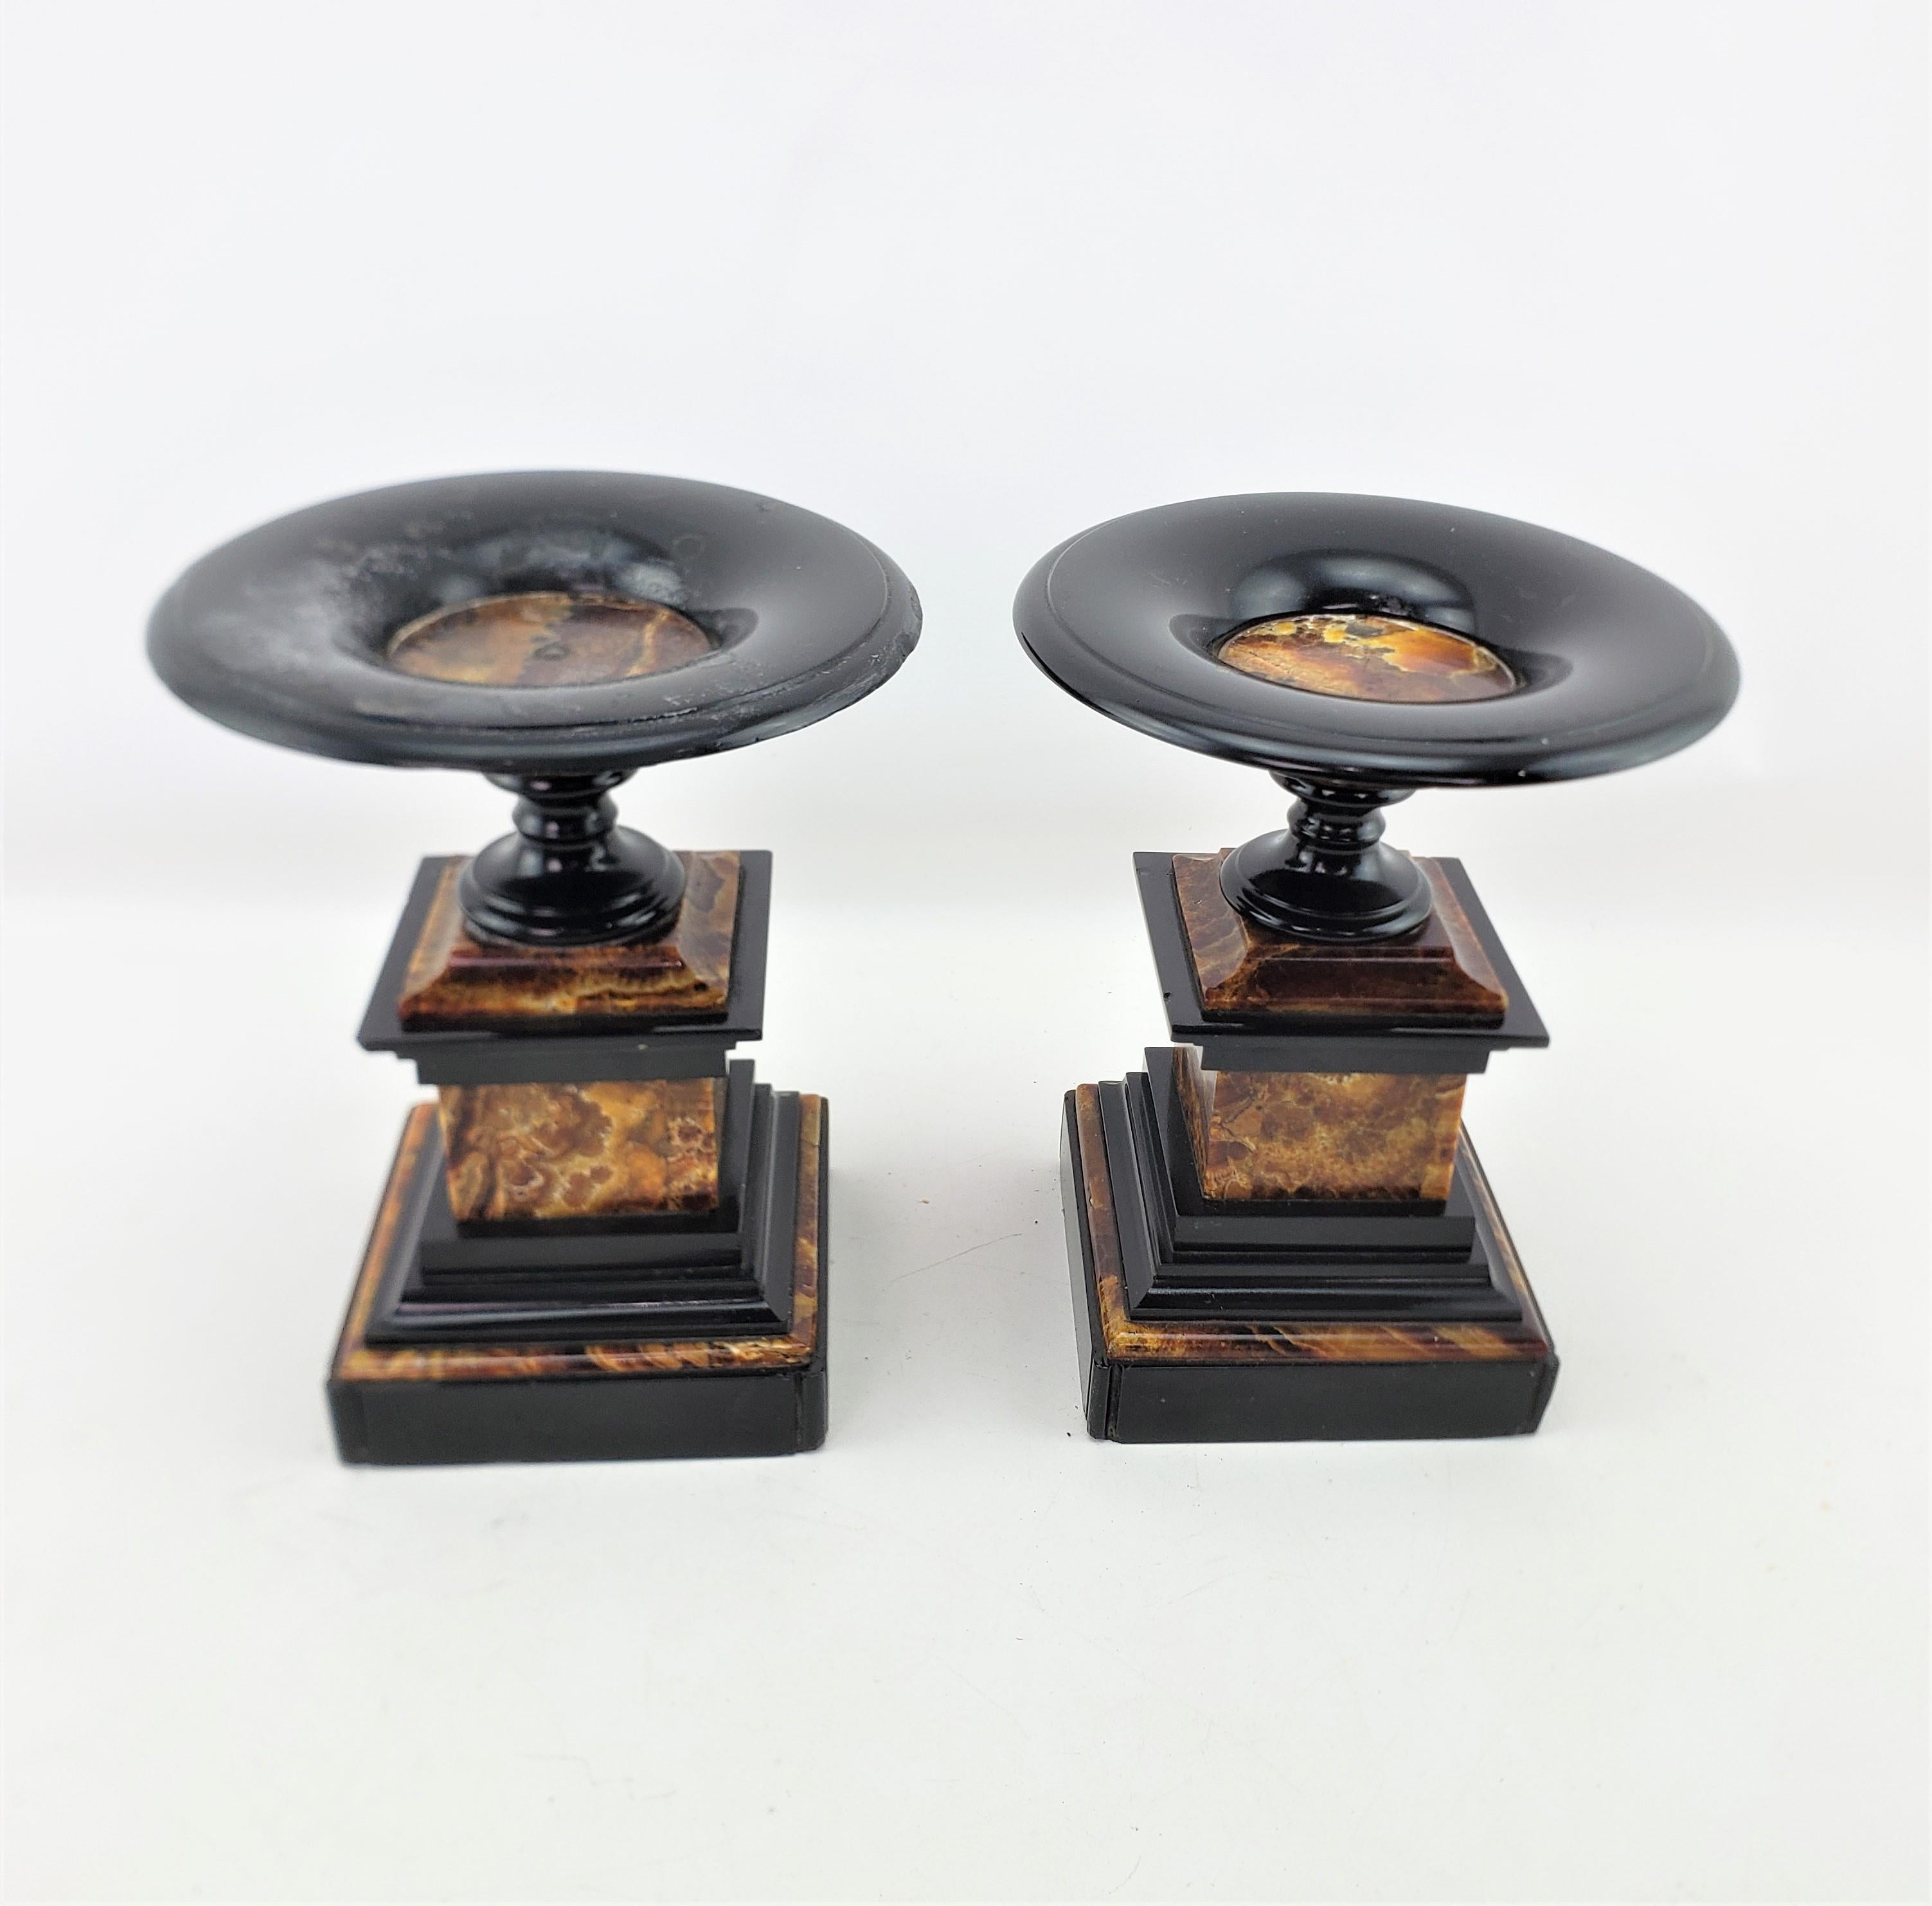 This antique garntirue or tazza set are unsigned, but presumed to have originated from France and date to approximately 1920 and done in an Art Deco style. The set is composed of a very decorative marble with variable colors of browns, orange and